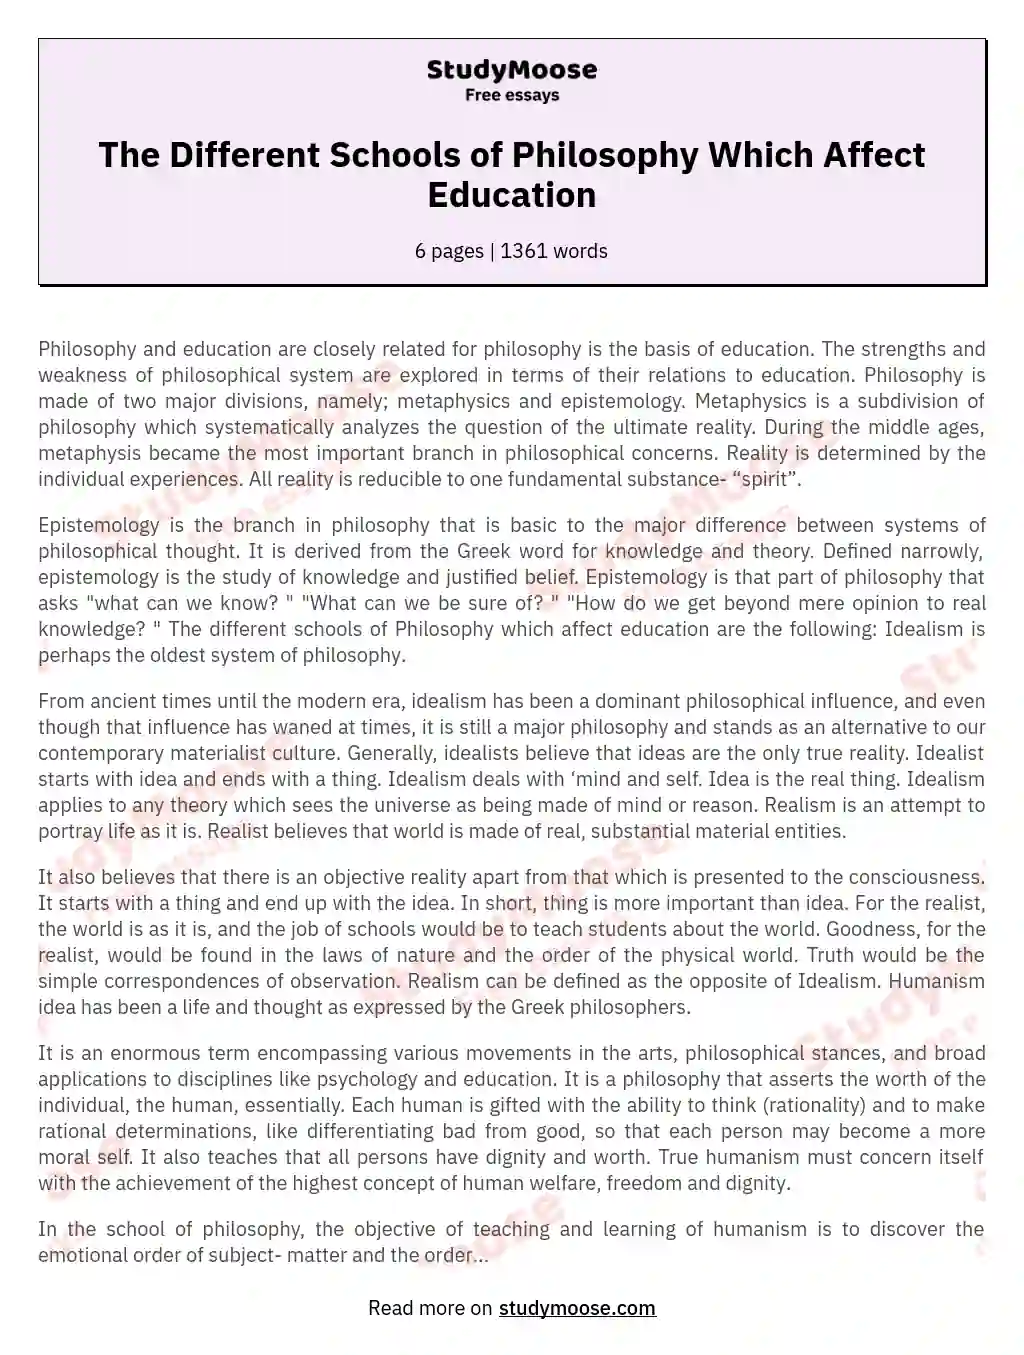 The Different Schools of Philosophy Which Affect Education essay